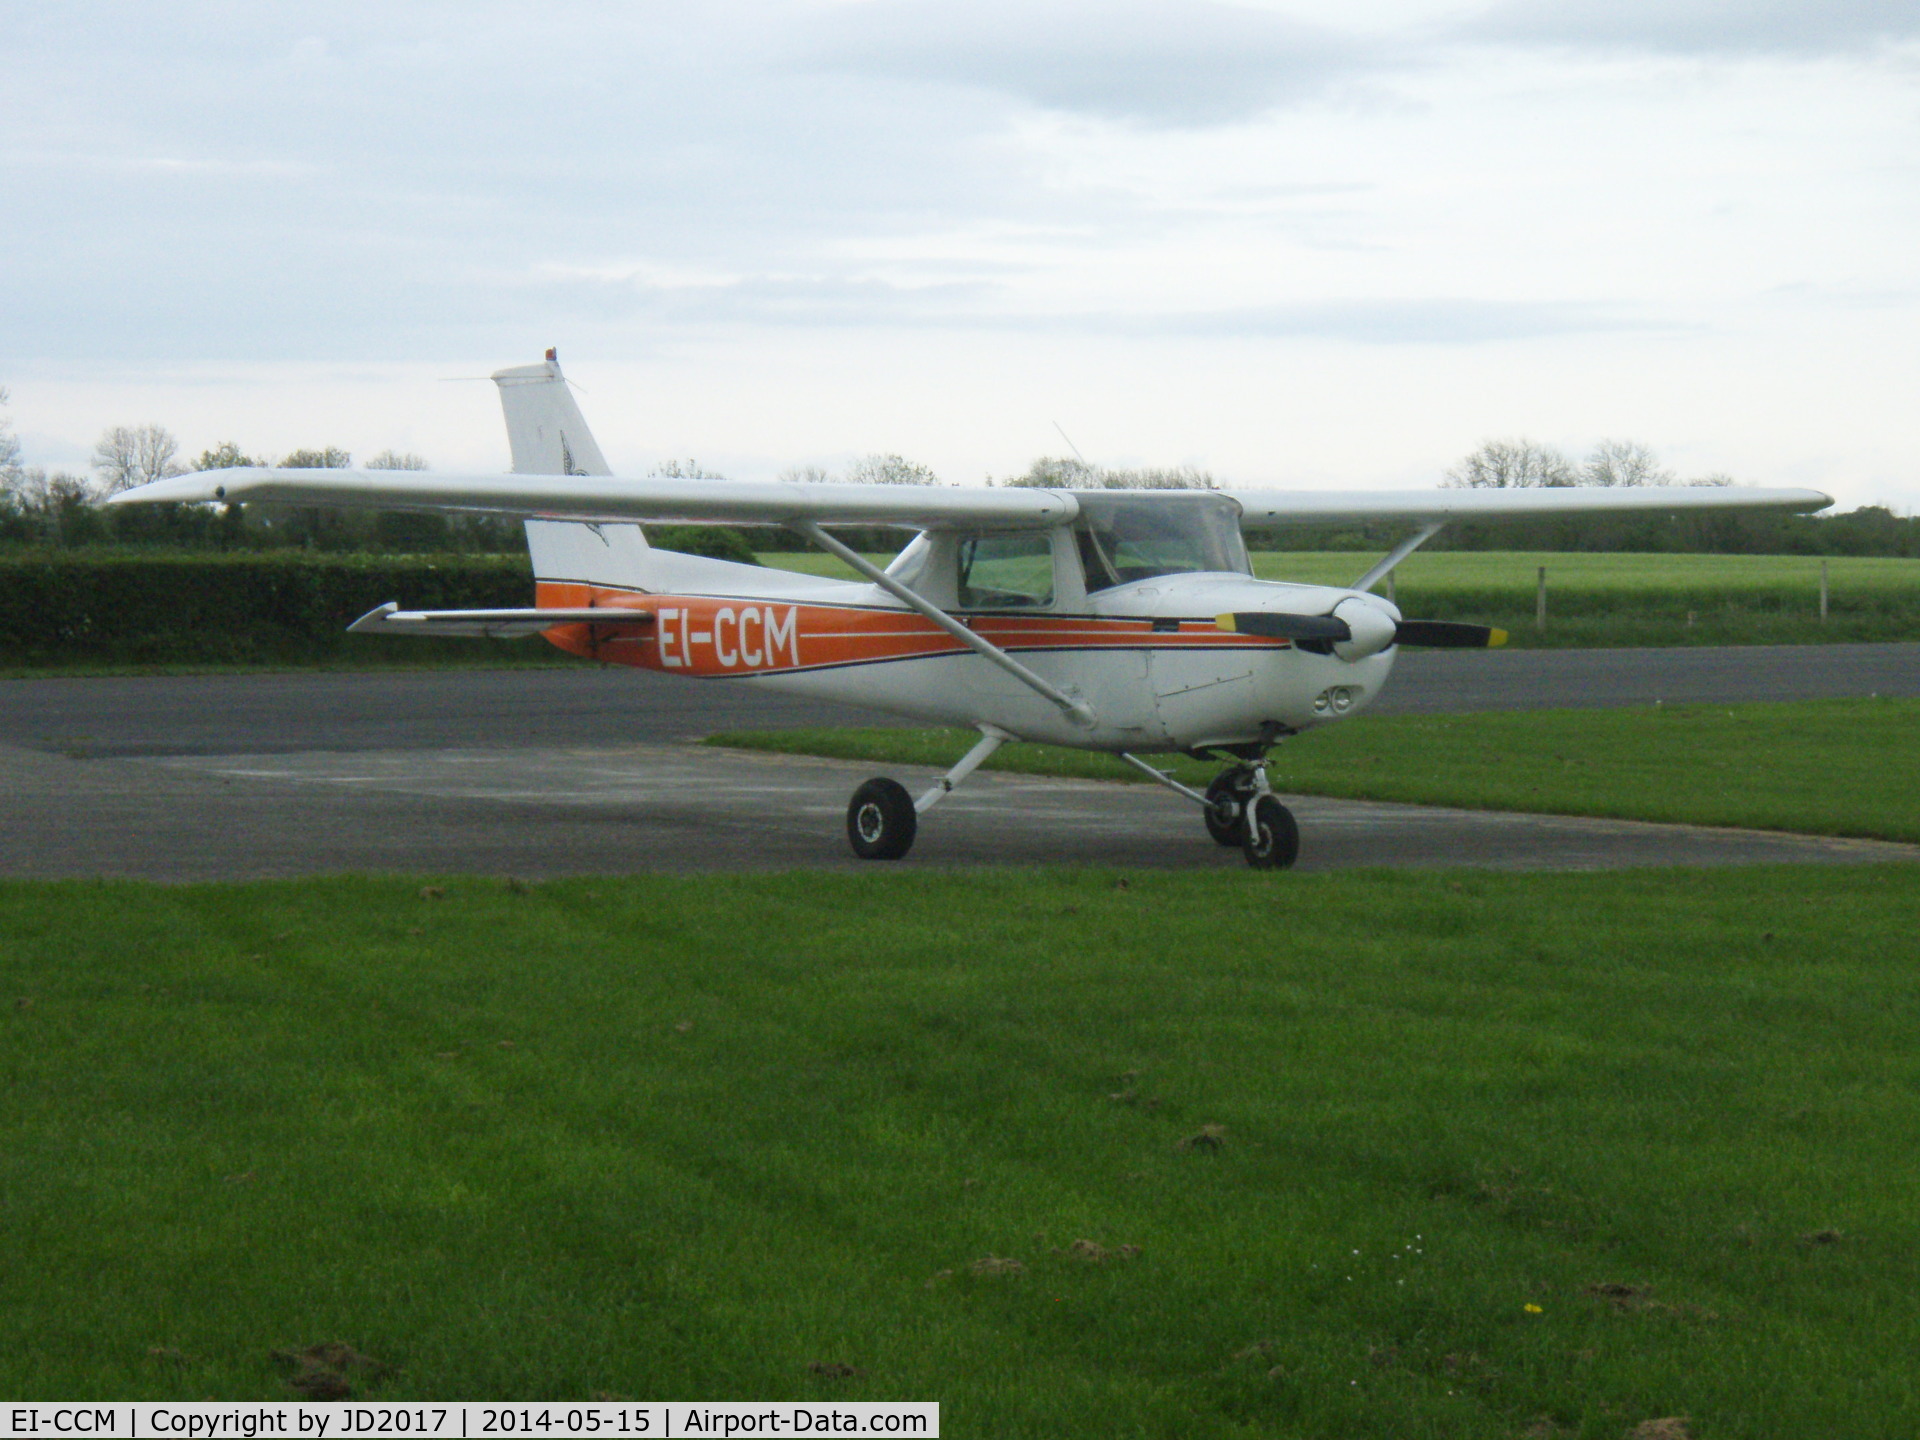 EI-CCM, 1979 Cessna 152 C/N 152-82320, EI-CCM at Clonbullogue Airfield, Co. Offaly, one May evening in 2014. (15th of May 2014).